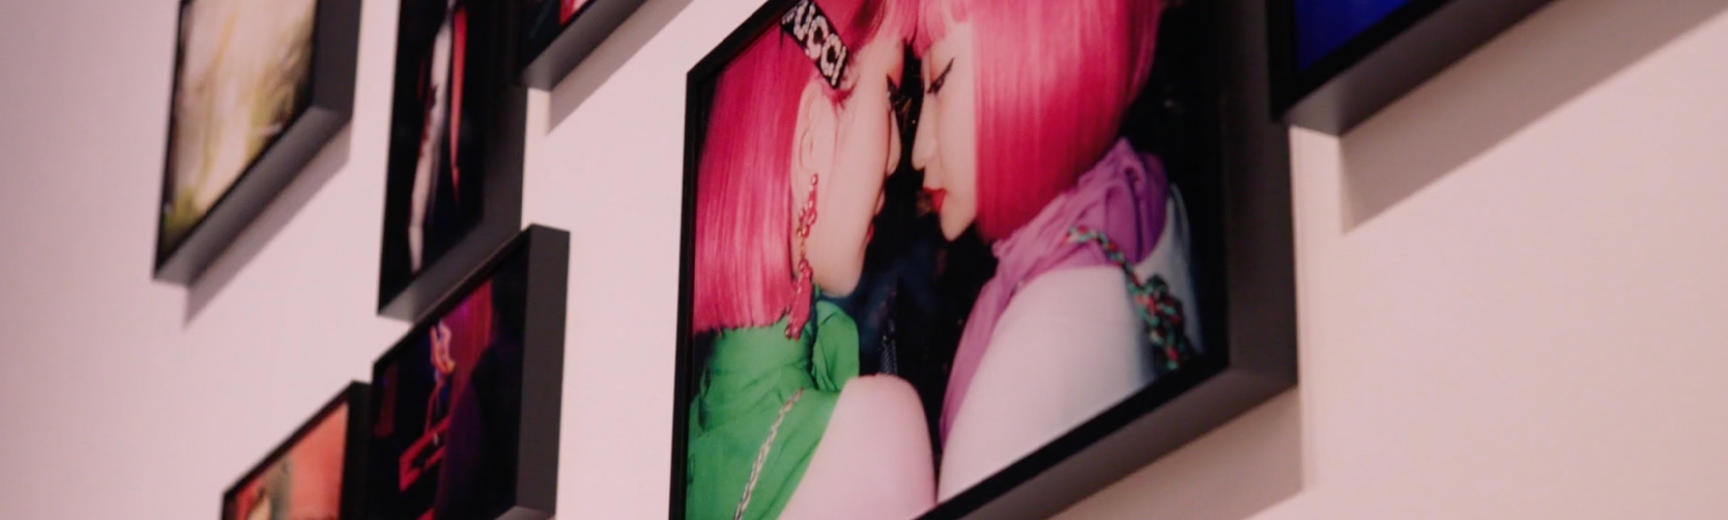 View of photographs mounted on a wall in black frames, including a photograph of two women with pink hair